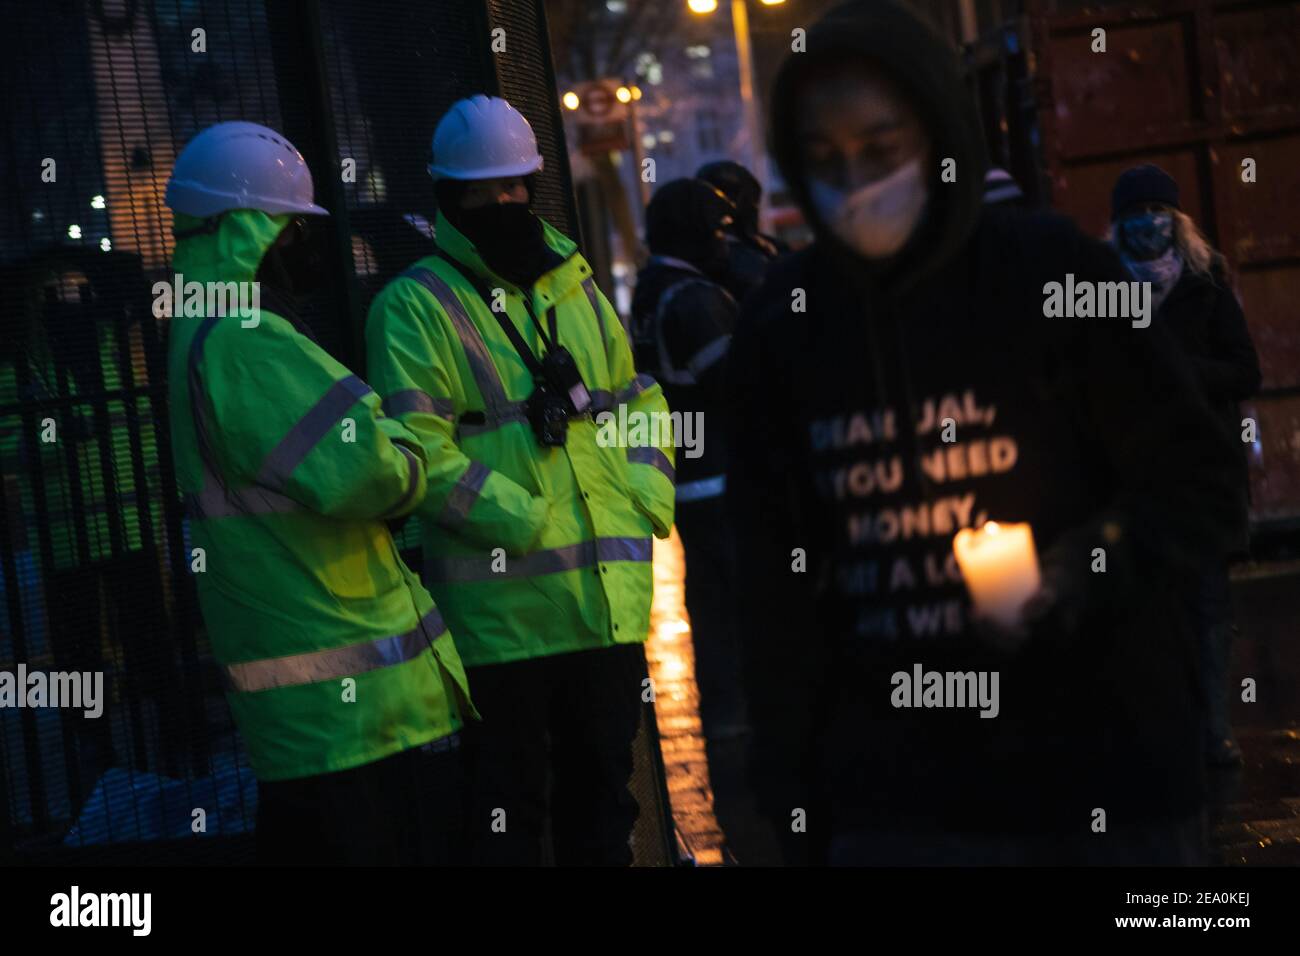 London, UK. 6th February, 2021. Candlelit vigil in remembrence of the lost trees at Euston Square, London as part of the Stop HS2 protest February 6th 2021. A woman carries a candle while security guards look on Credit: Denise Laura Baker/Alamy Live News Stock Photo